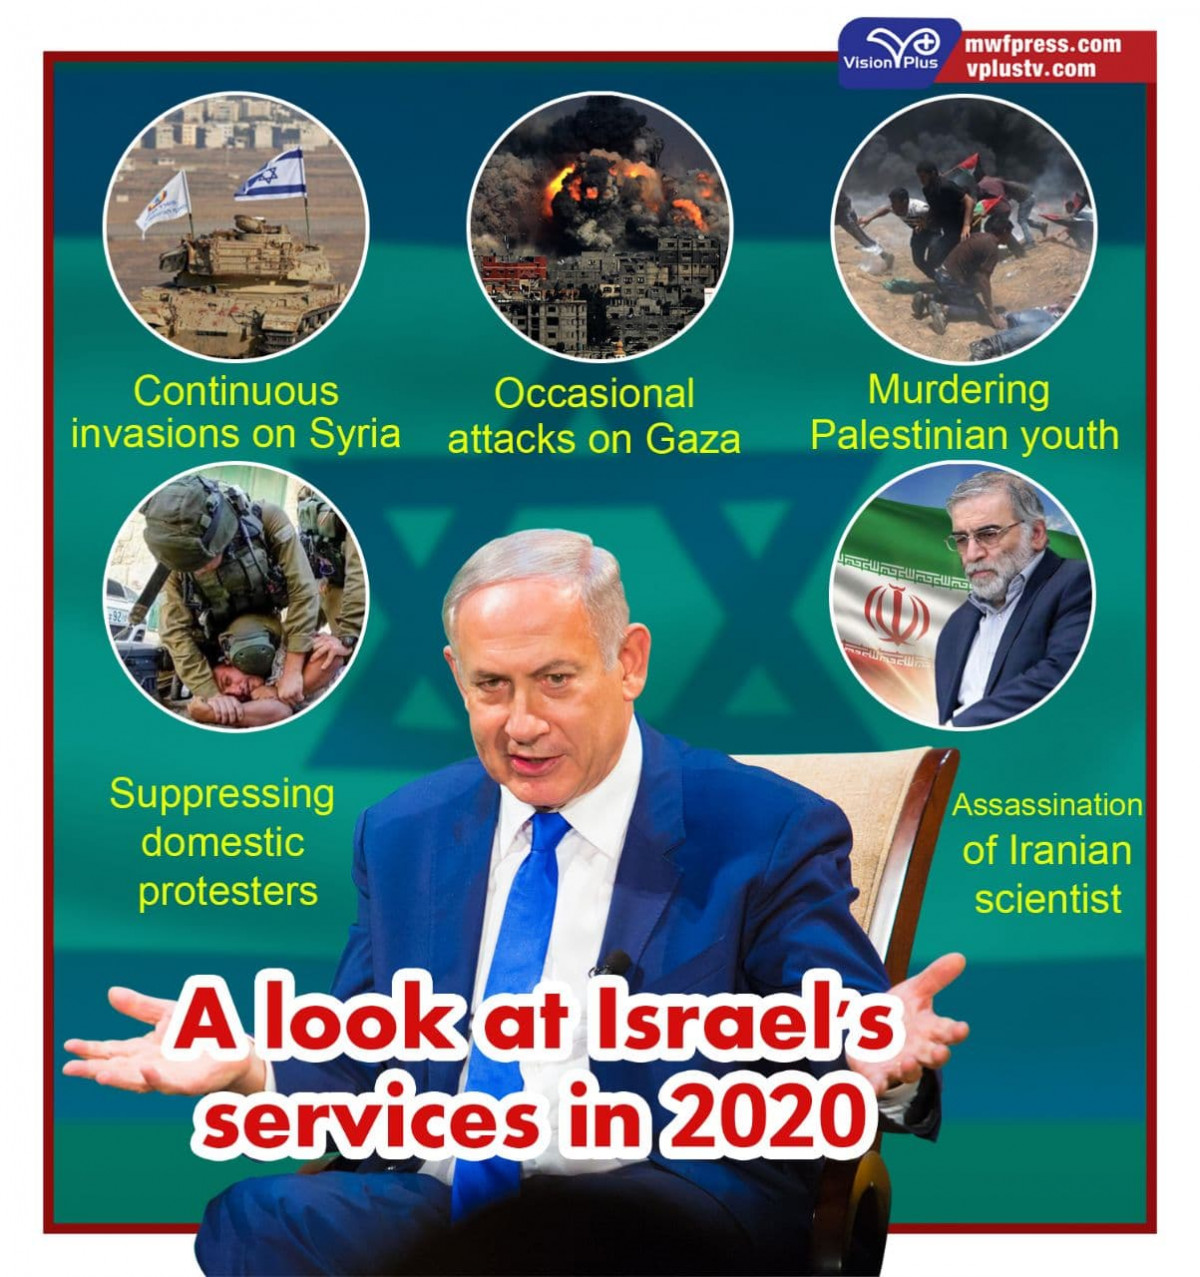 A look at Israel's services in 2020